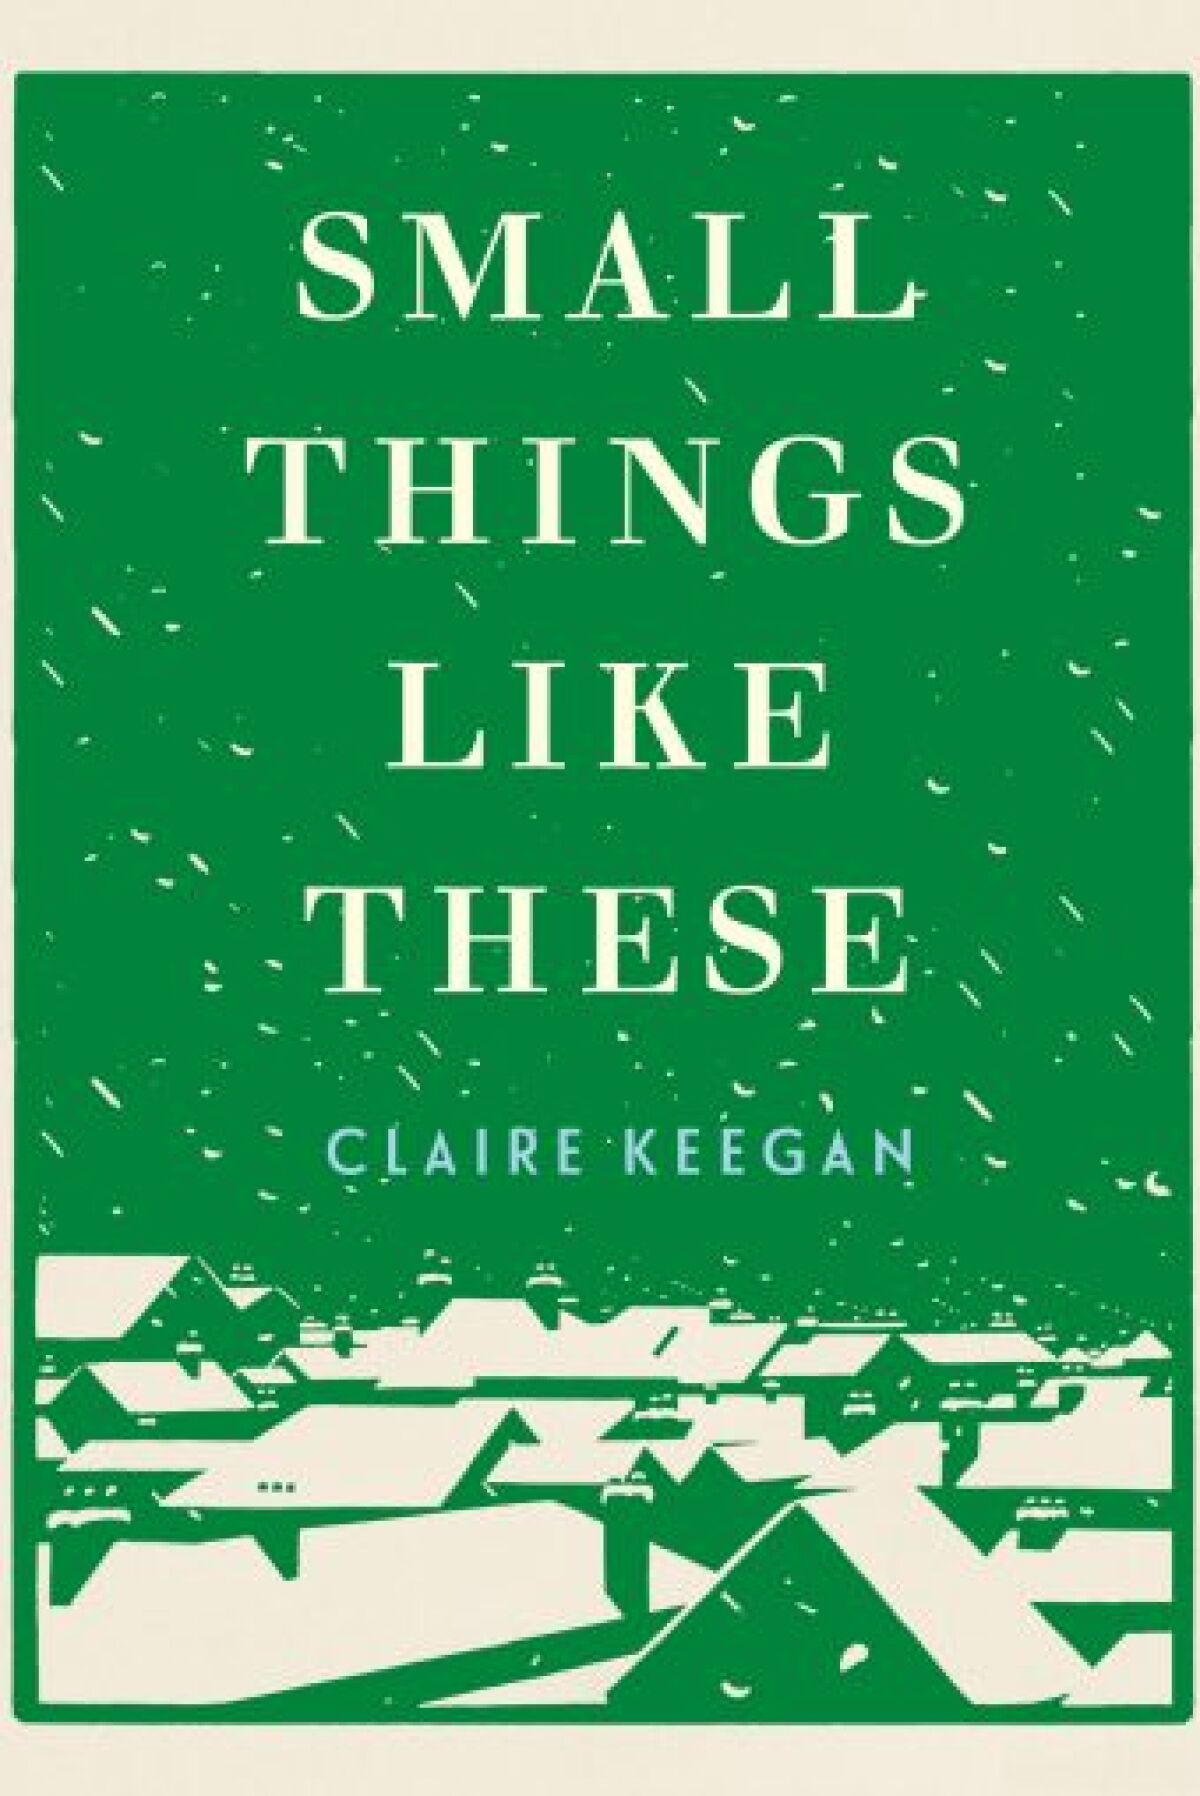 The green cover of "Small Things Like These," by Claire Keegan